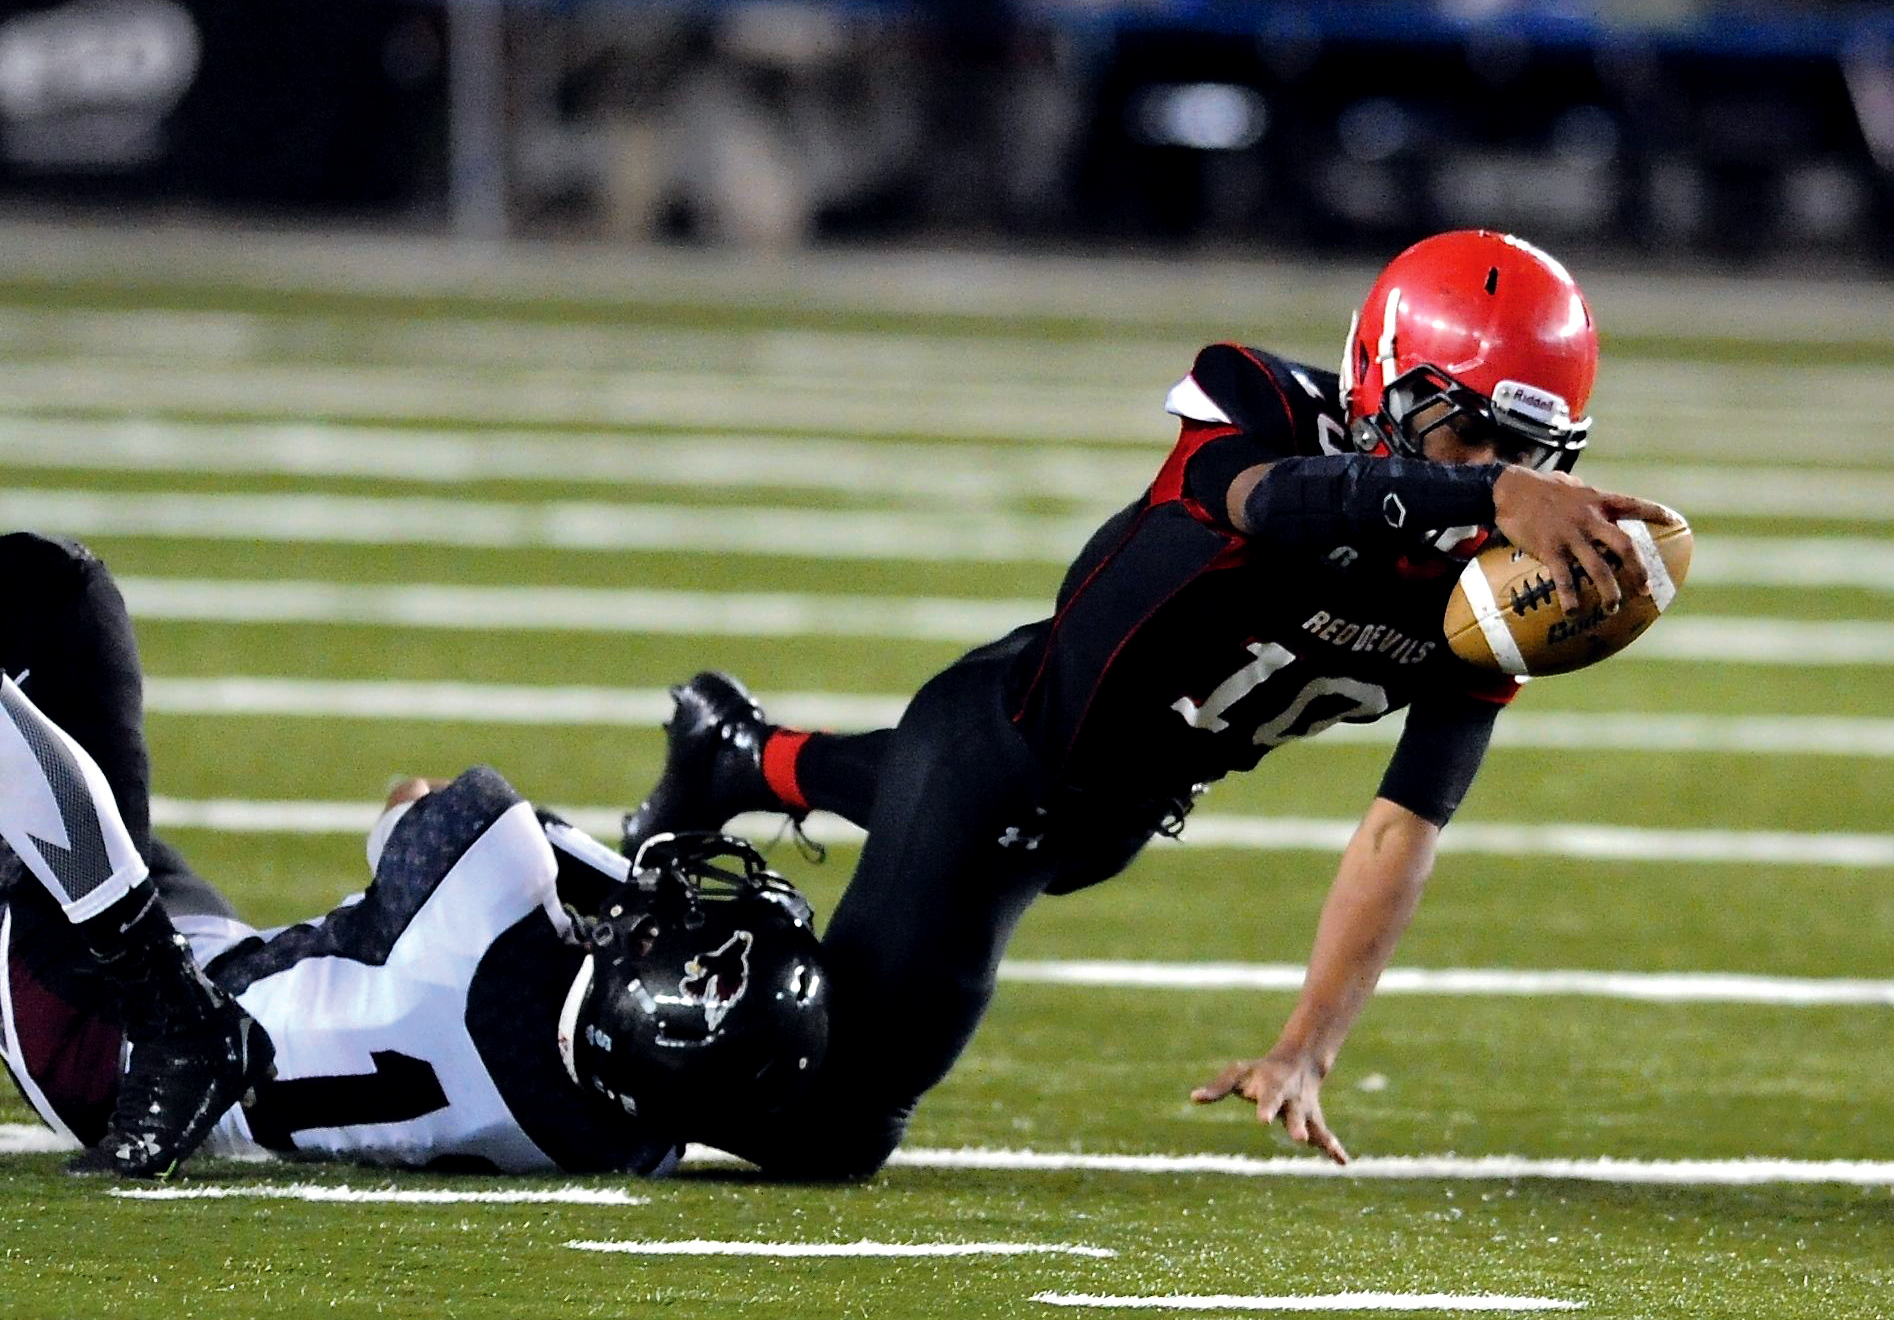 Neah Bay's Rwehabura Munyagi Jr. reaches for extra yards after being brought down by Lummi's Free Borsey during the Red Devils 26-20 loss in the state semifinals. Jeff Halstead/for Peninsula Daily News